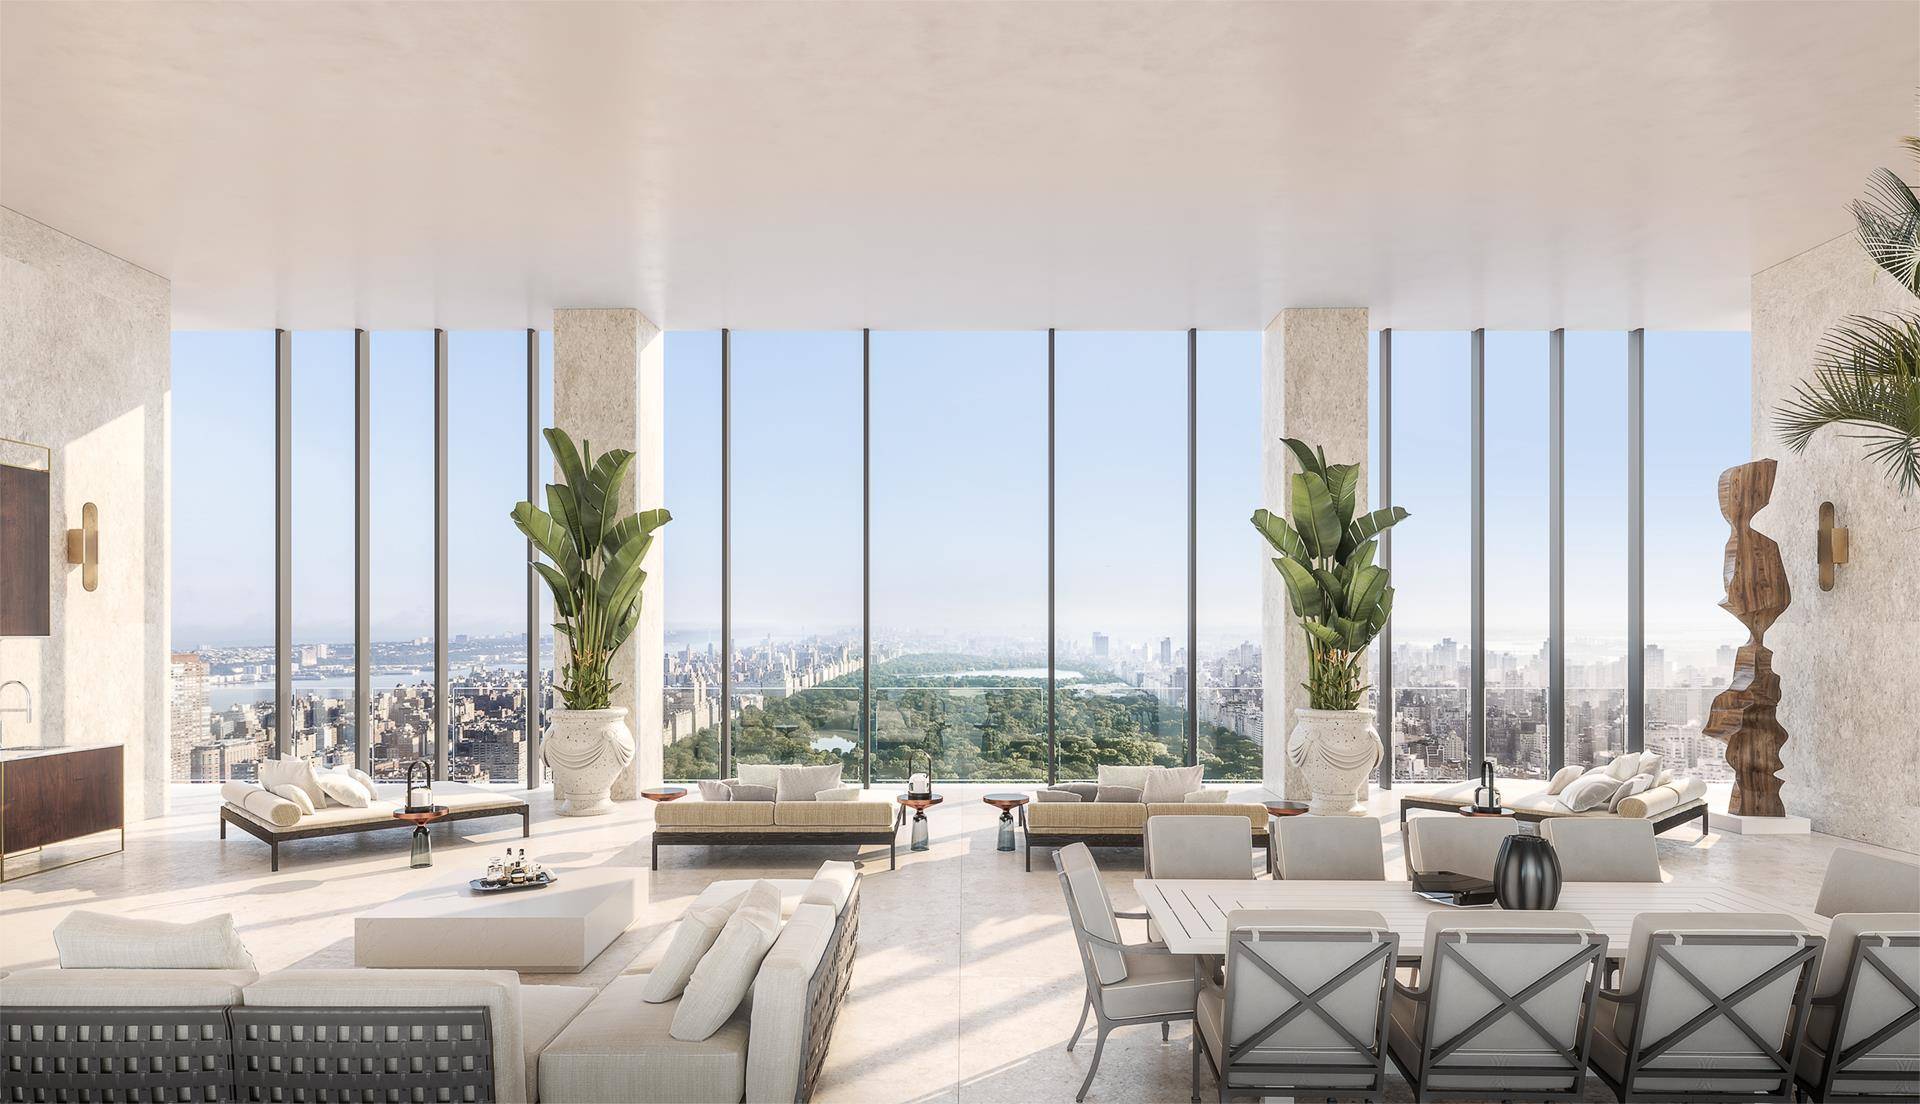 Triplex Penthouse 72 is a spectacular, one of a kind penthouse residence that offers the grandeur of expansive indoor outdoor living across three full floors, all with breathtaking, unobstructed 360 ...